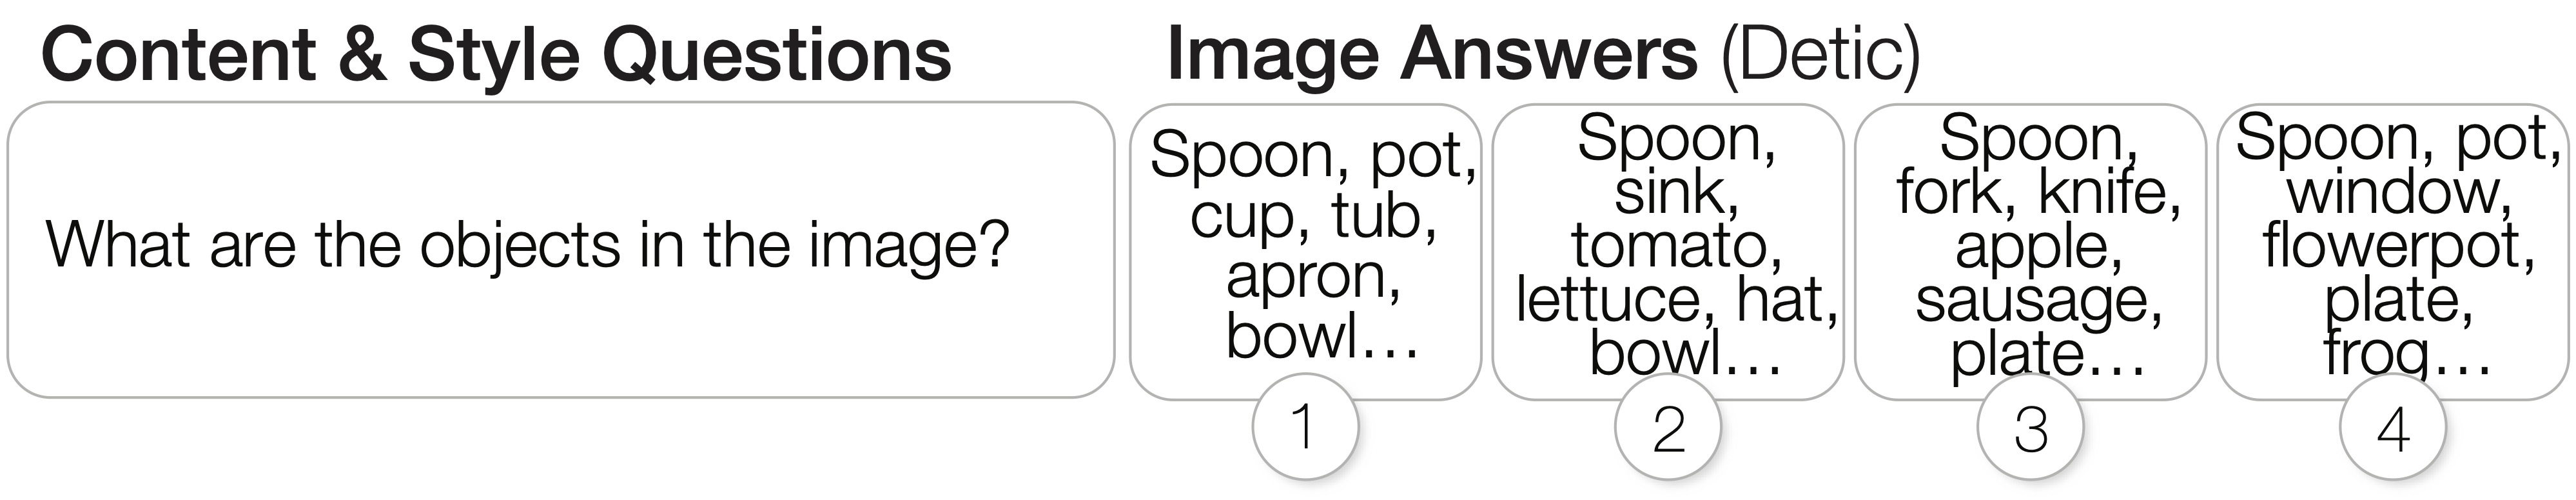 This figure shows an example of the object detection results using Detic per image. The first image depicts spoon, pot, cup, tub, apron, bowl, etc. The second image depicts spoon, sink, tomato, lettuce, hat, bowl, etc. The third image shows spoon, fork, knife, apple, sausage, plate, etc. The fourth image shows spoon, pot, window, flowerpot, plate, frog, etc.